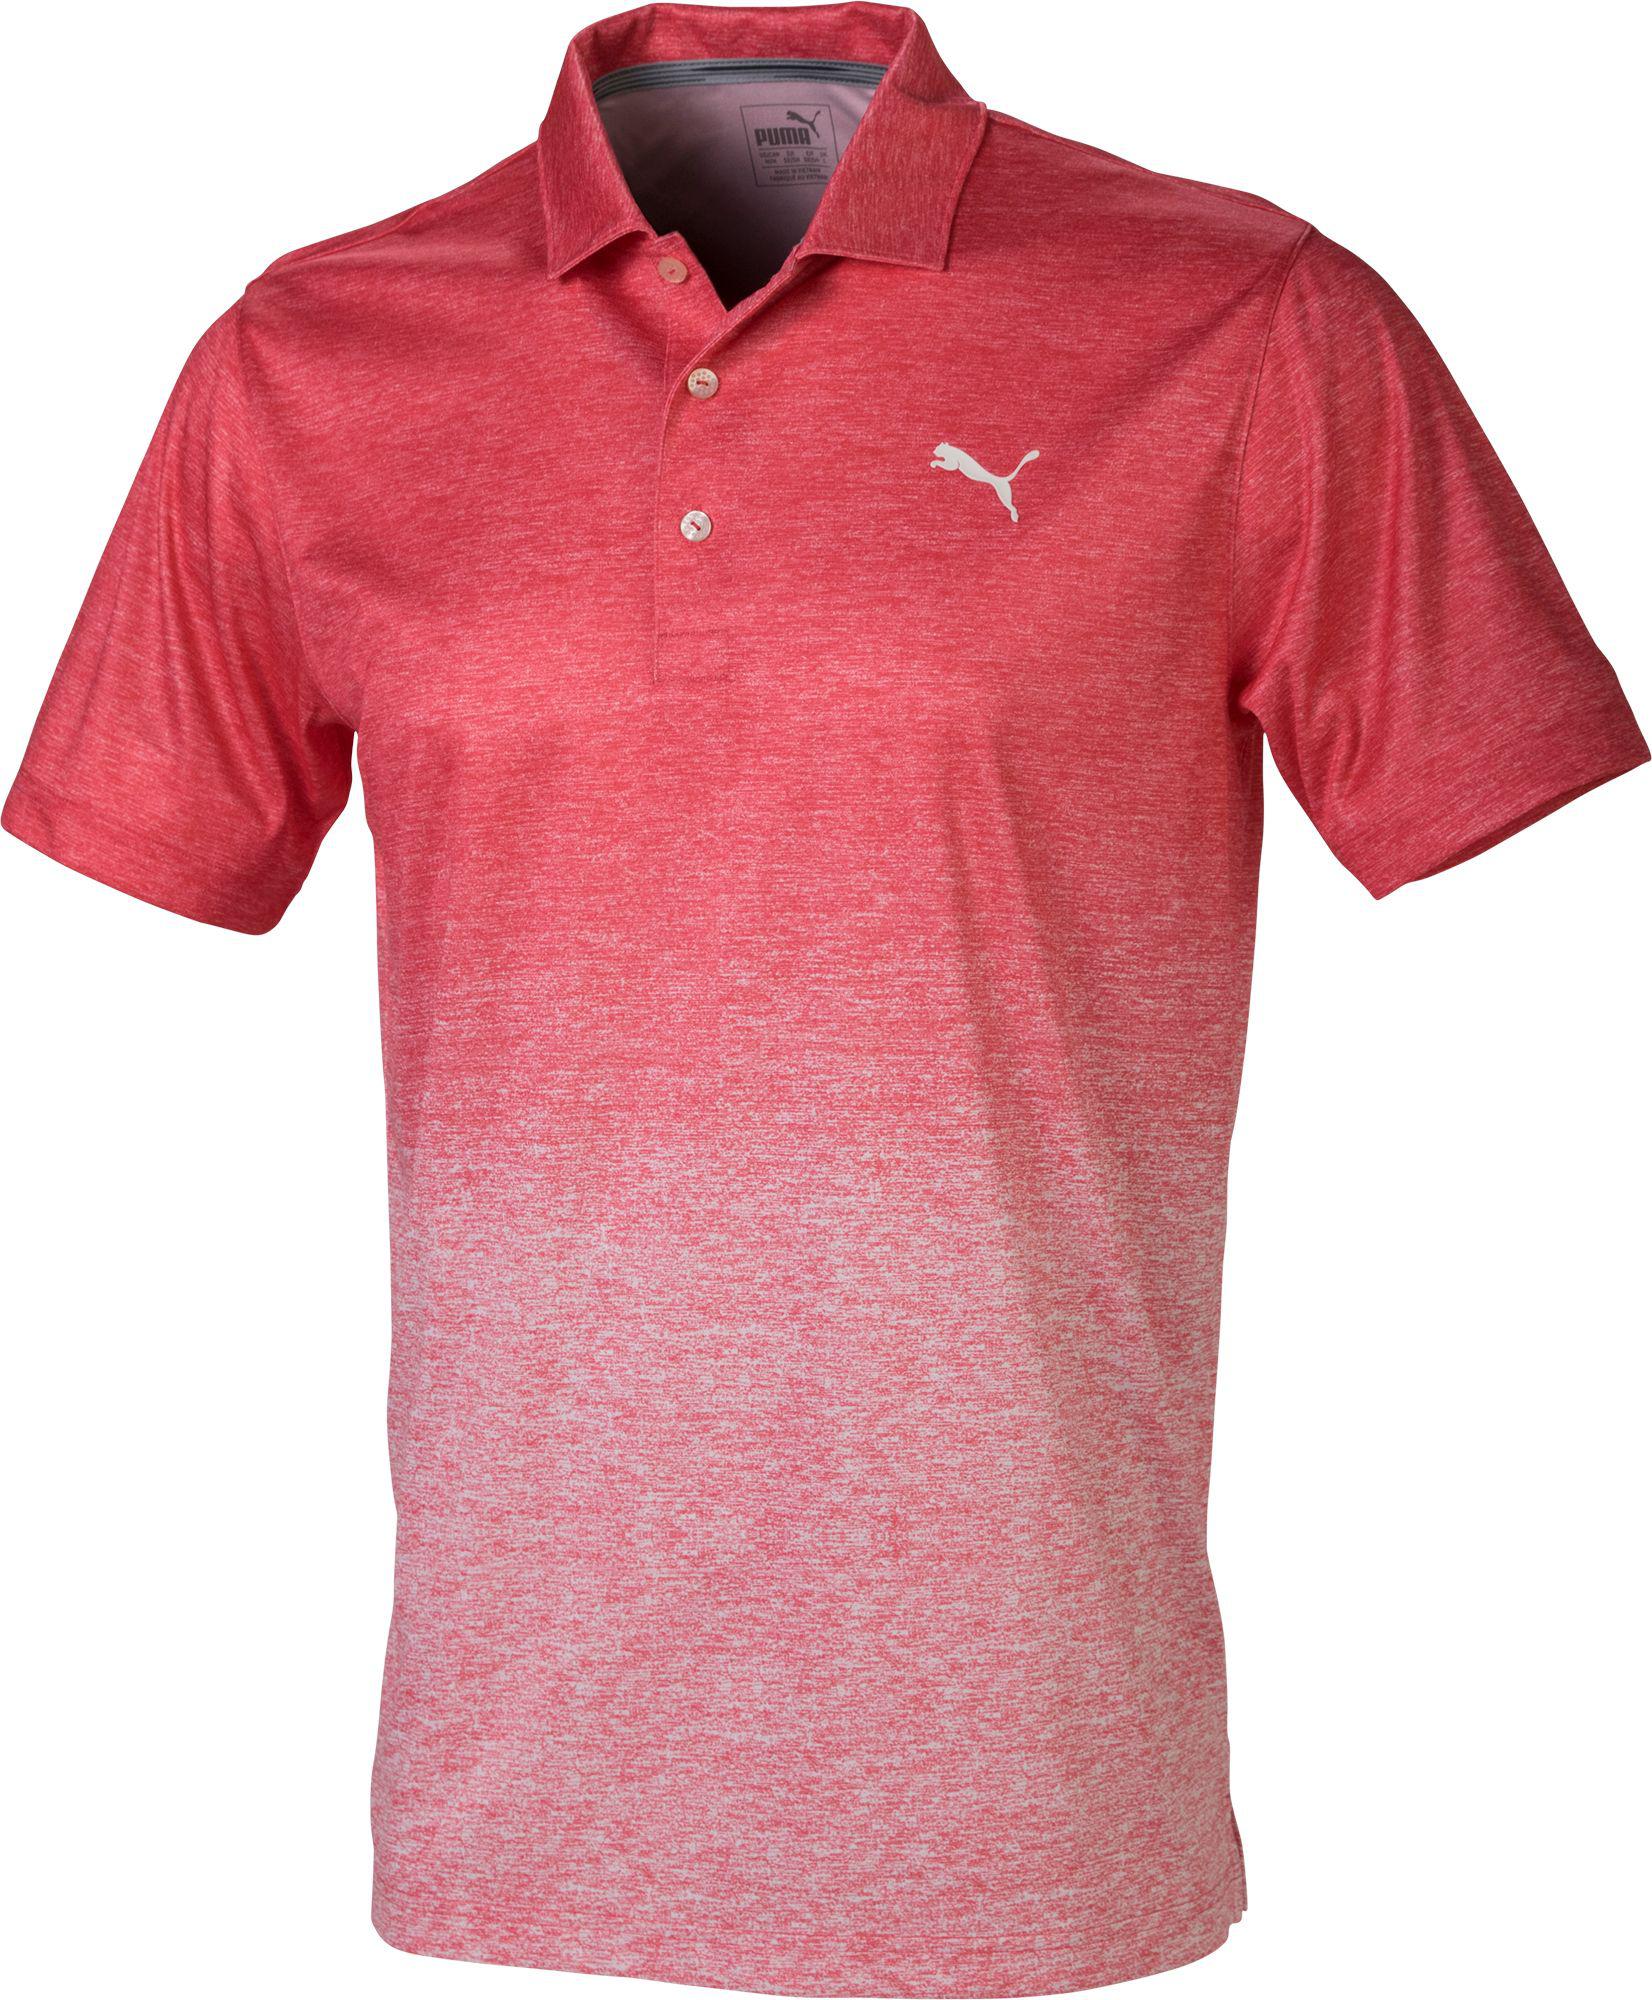 Gradient Golf Polo in Pink for Men - Lyst